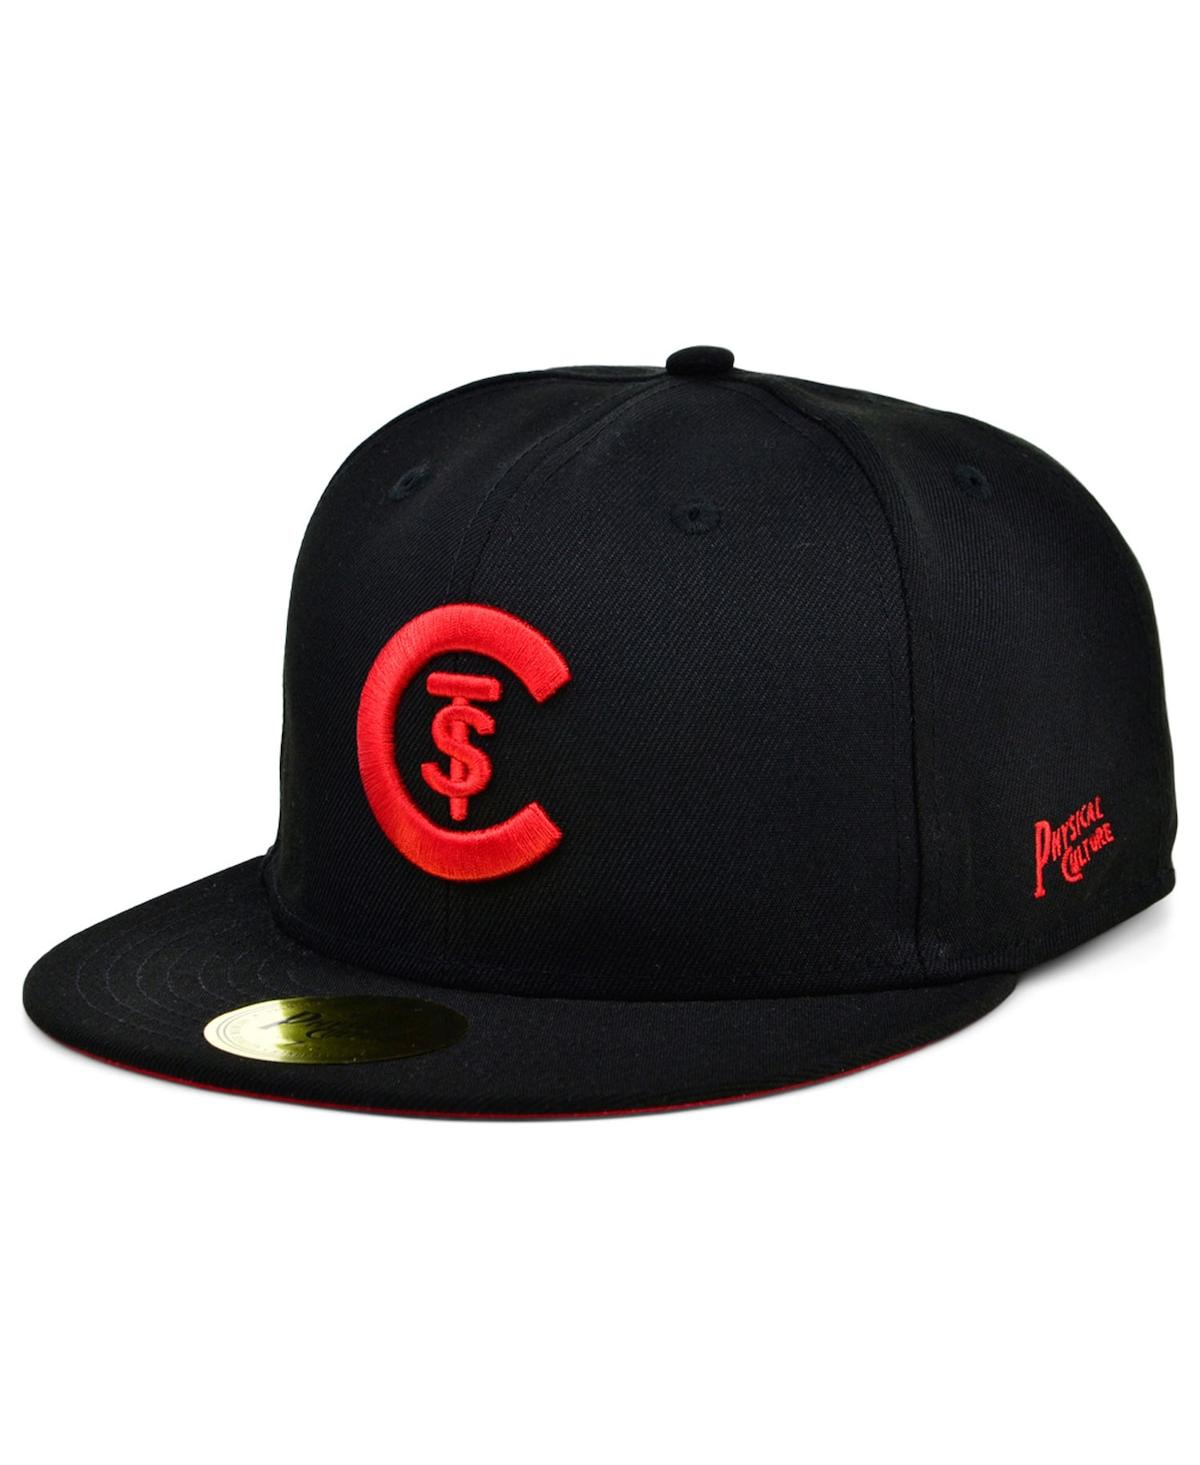 Shop Physical Culture Men's  Black St. Christopher Club Black Fives Fitted Hat